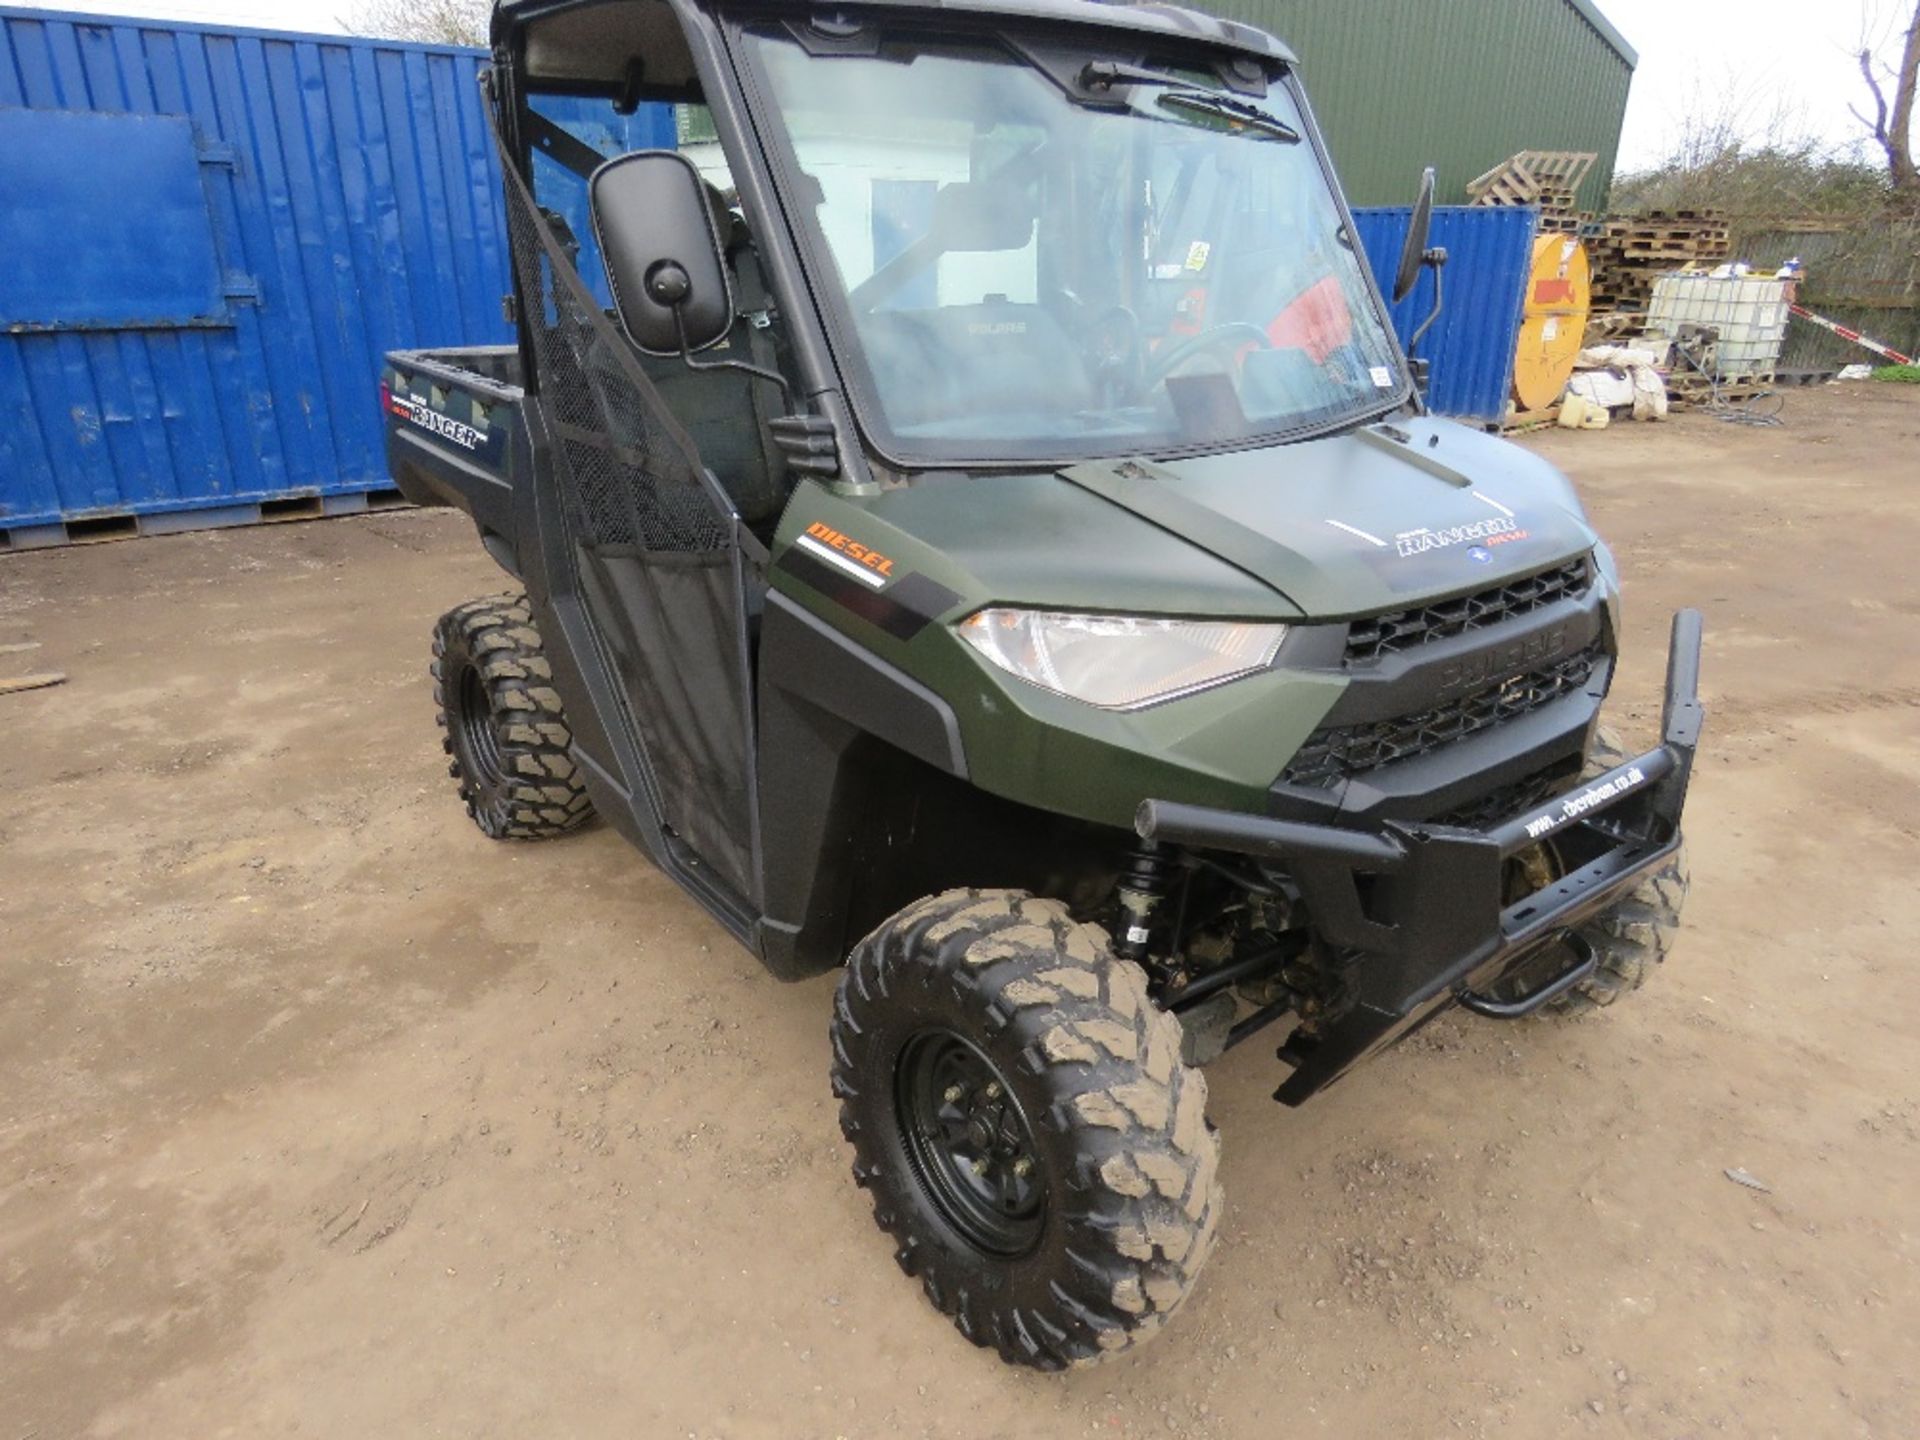 POLARIS 902 DIESEL RANGER WITH KUBOTA ENGINE, SCREEN ROOF AND BACK WINDOW. REG:EX71 RZA WITH V5, FIR